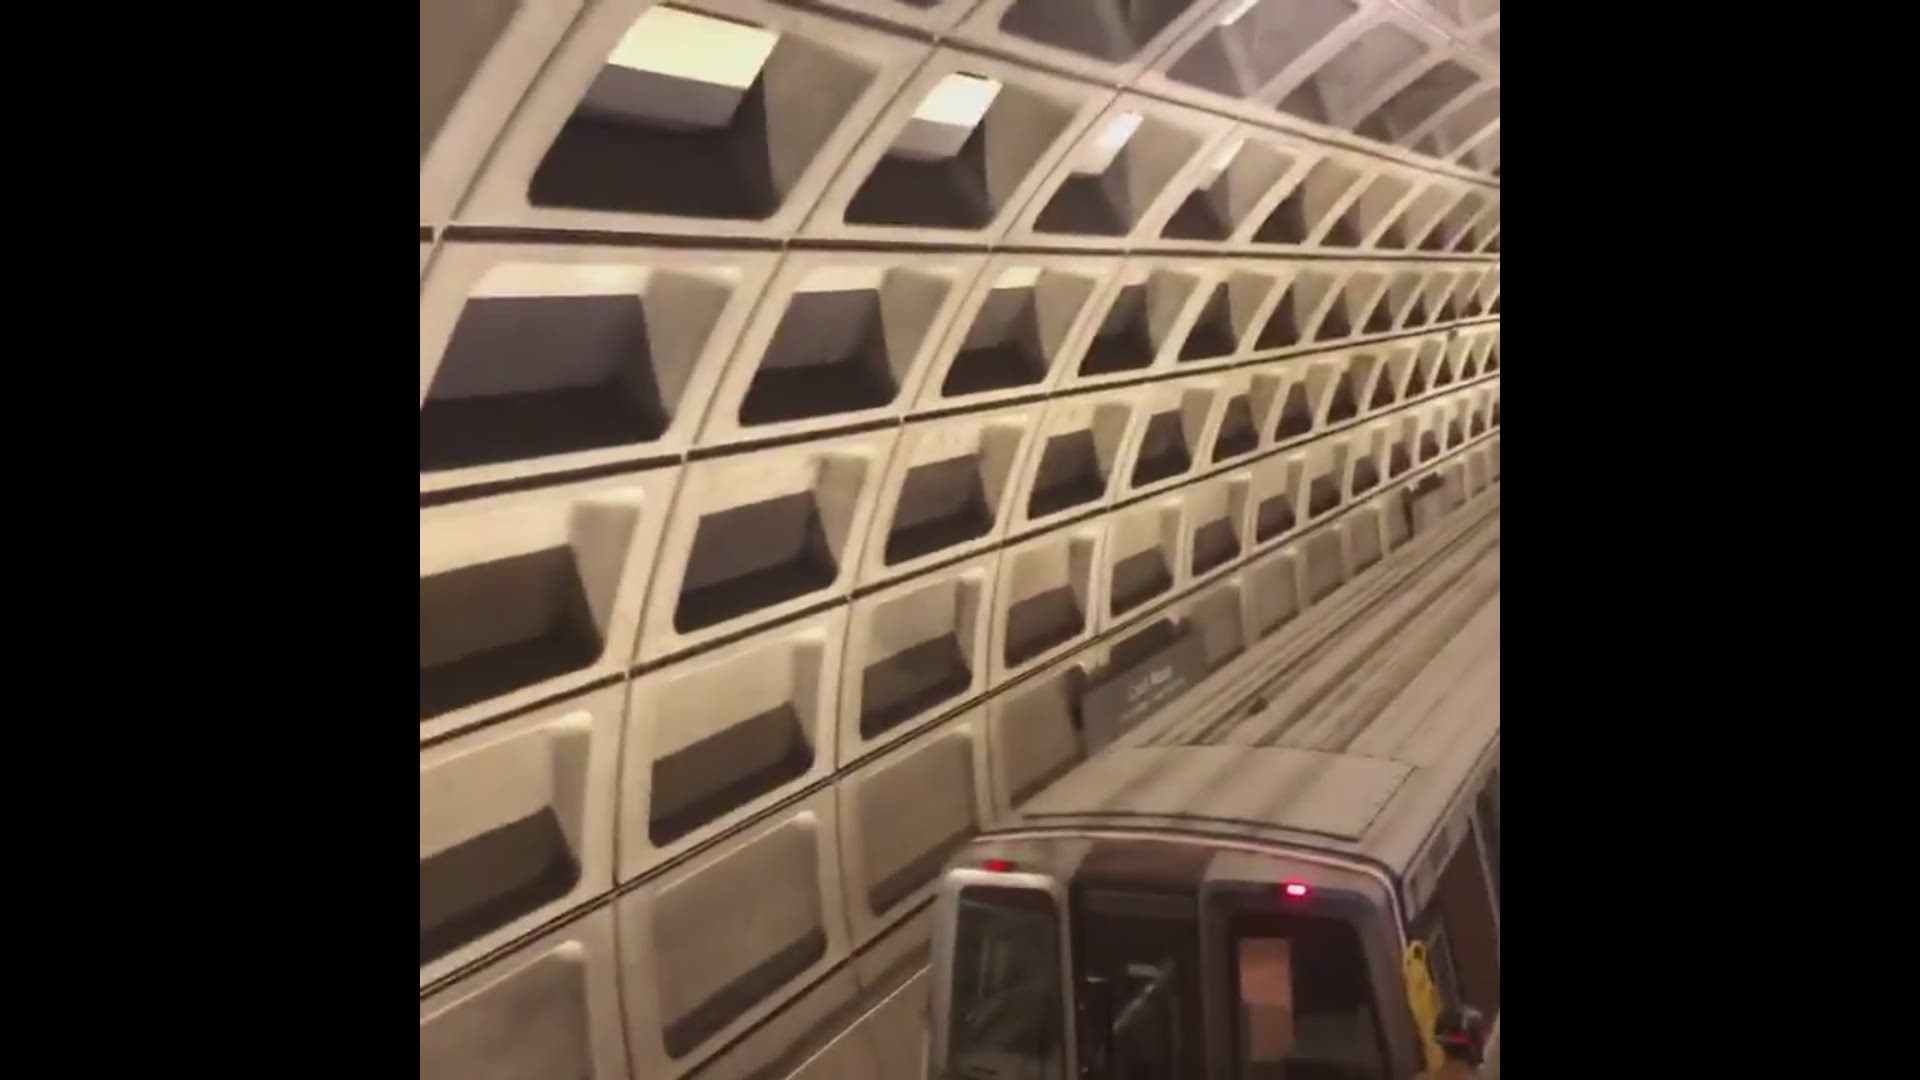 WMATA said the woman may have had a medical emergency before falling off the platform. (Video courtesy Twitter user @chrissydababy)